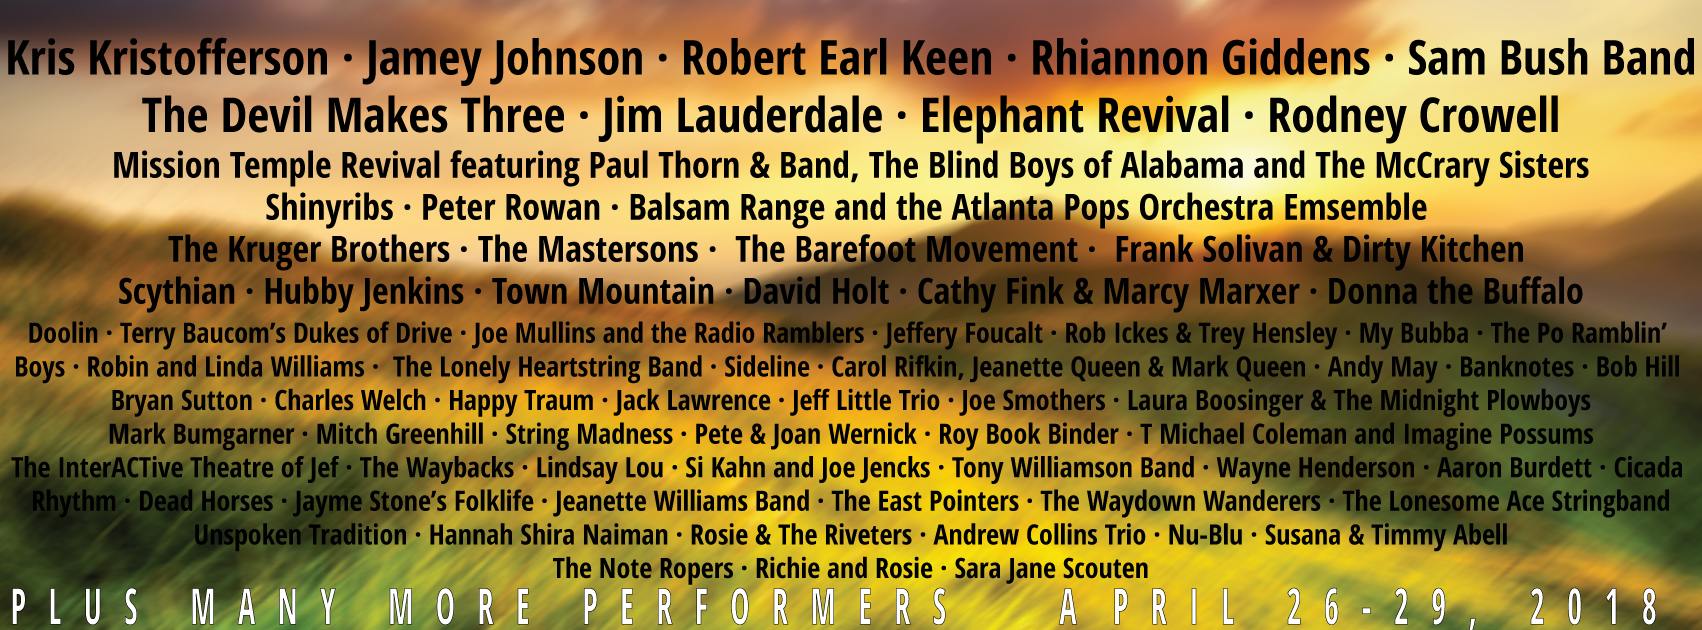 More Artists Added to MerleFest 2018 Lineup